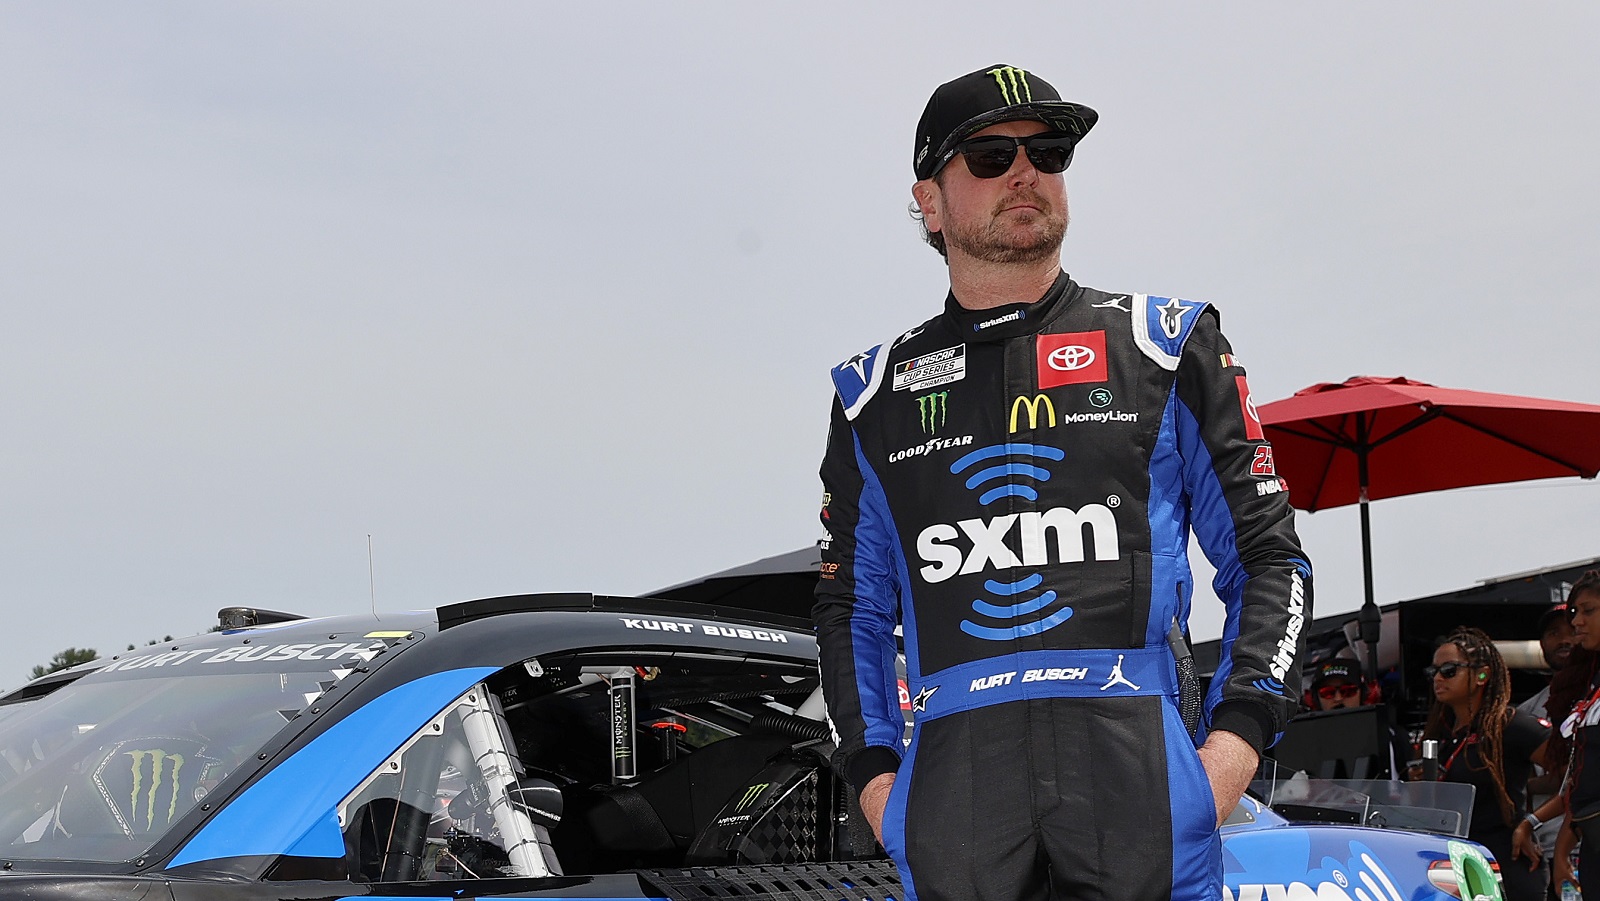 Kurt Busch waits on the grid during practice for the NASCAR Cup Series Ambetter 301 at New Hampshire Motor Speedway on July 16, 2022. | Tim Nwachukwu/Getty Images